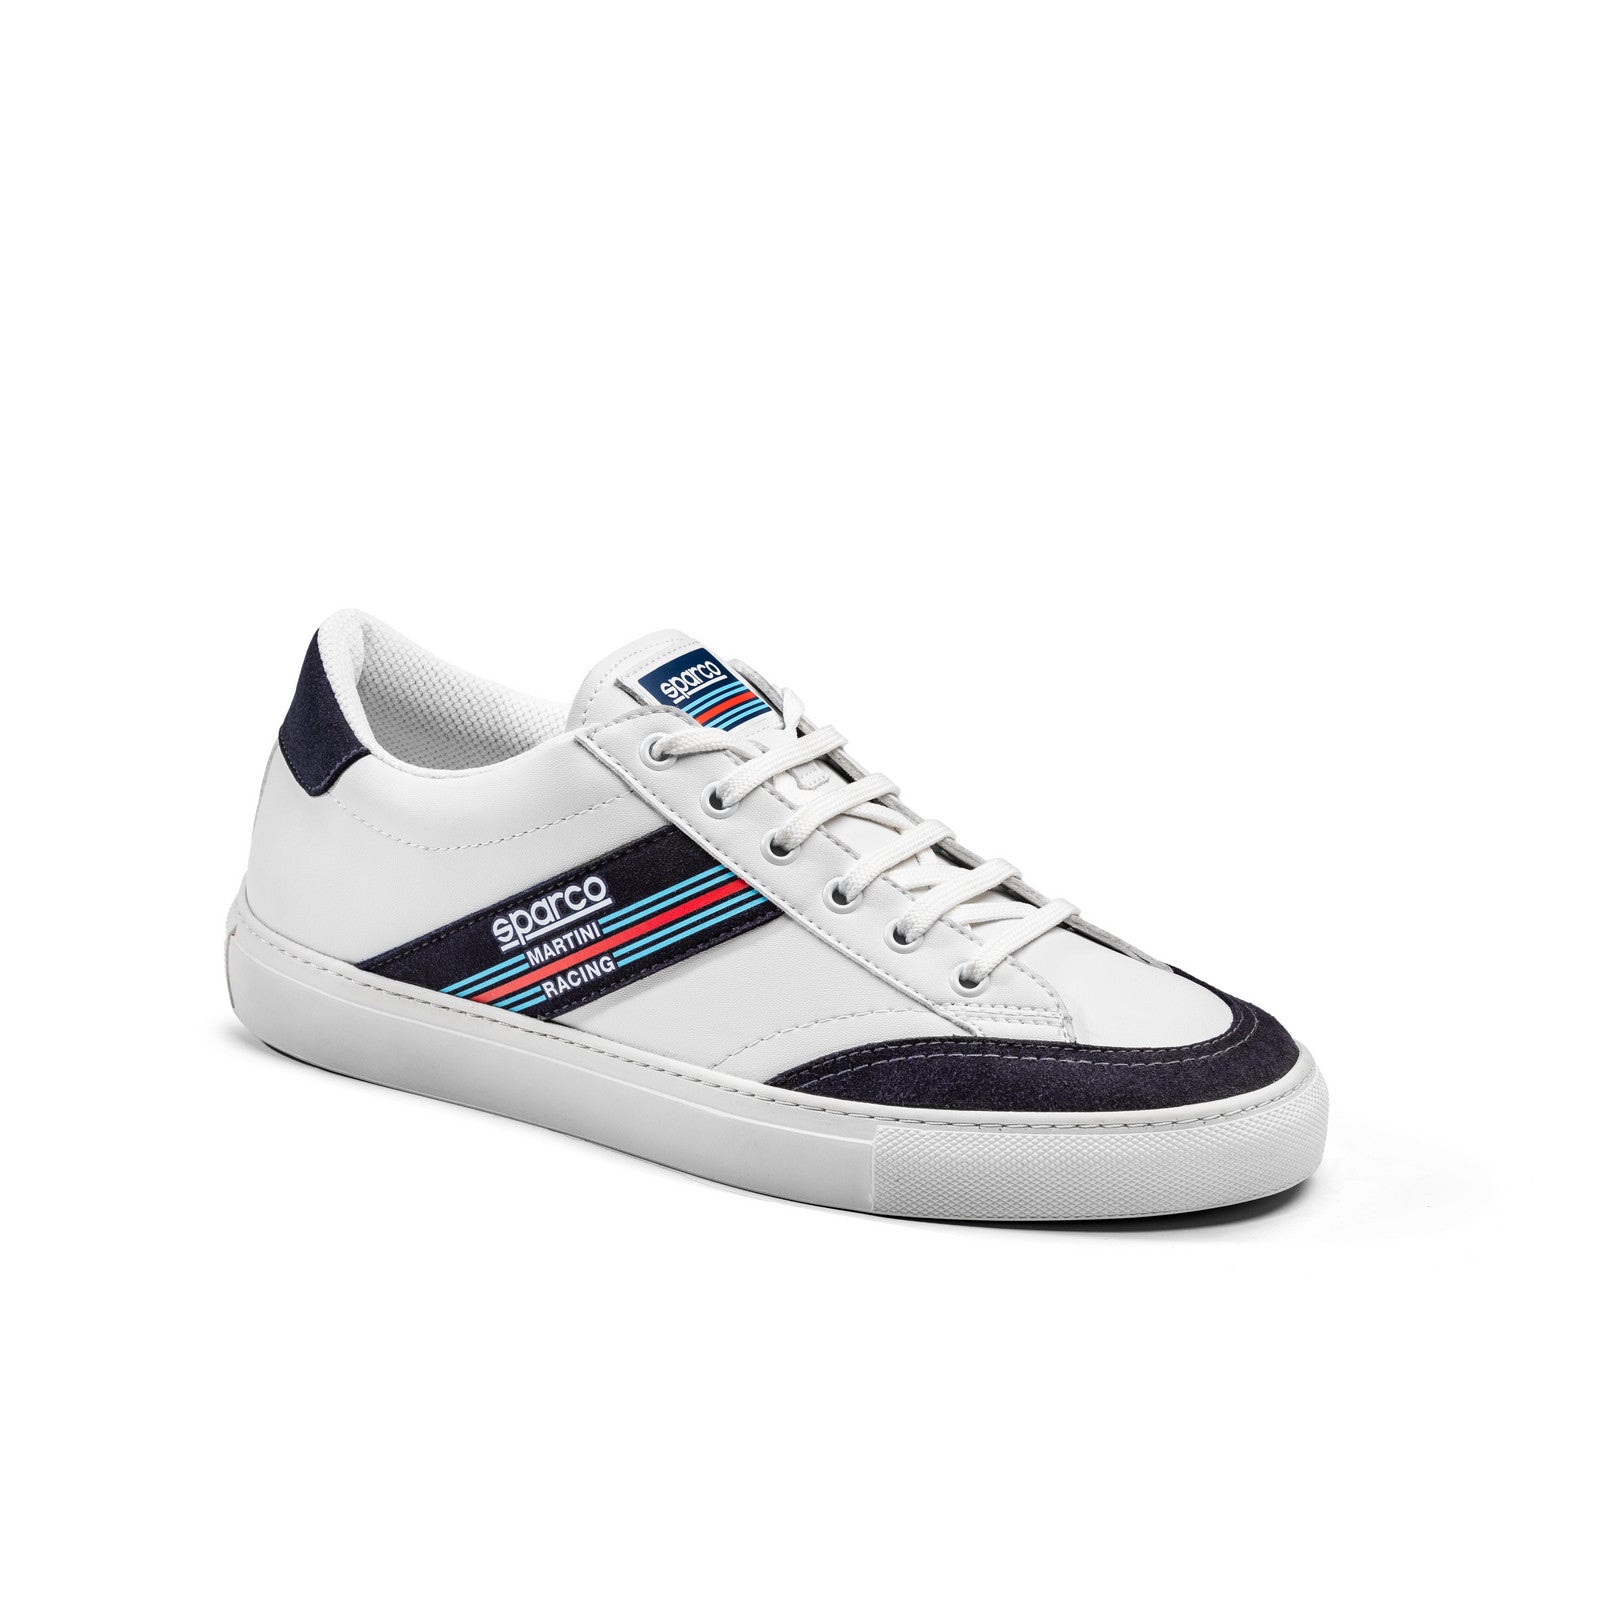 SHOES S-TIME MARTINI-R - Sparco Shop